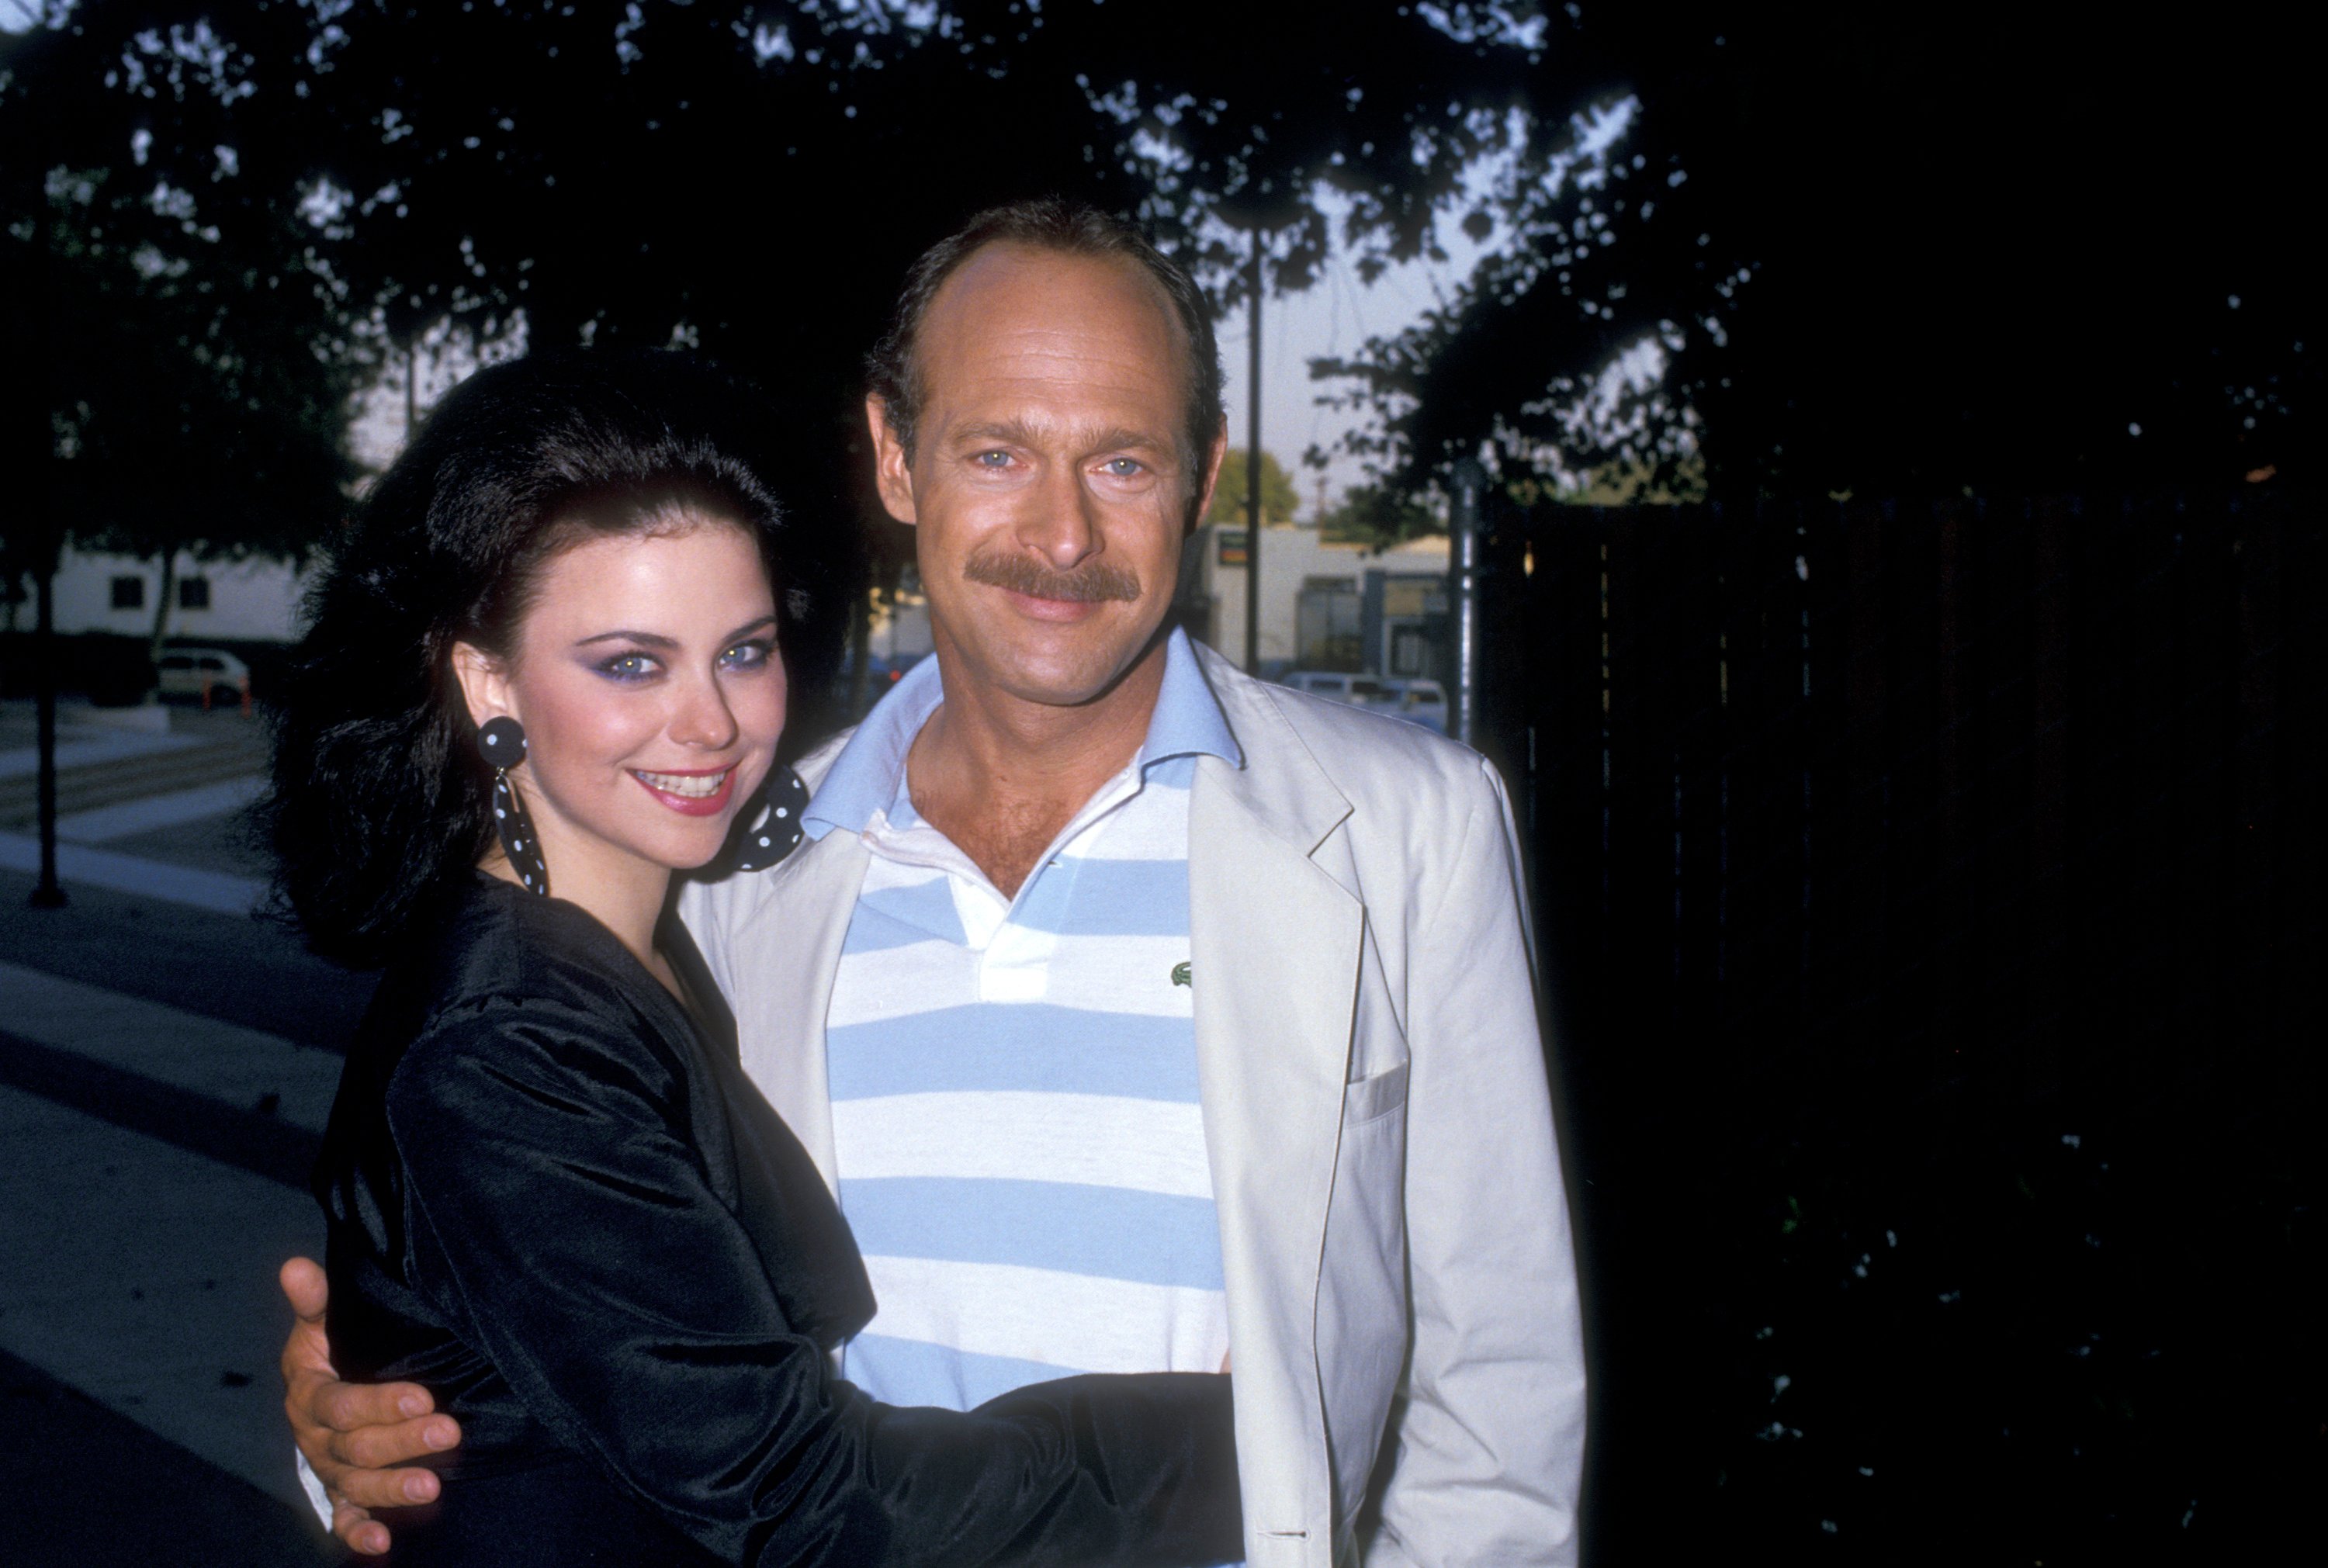 Delta Burke with her husband, Gerald McRaney pose for a photo together at Pacific Design Center